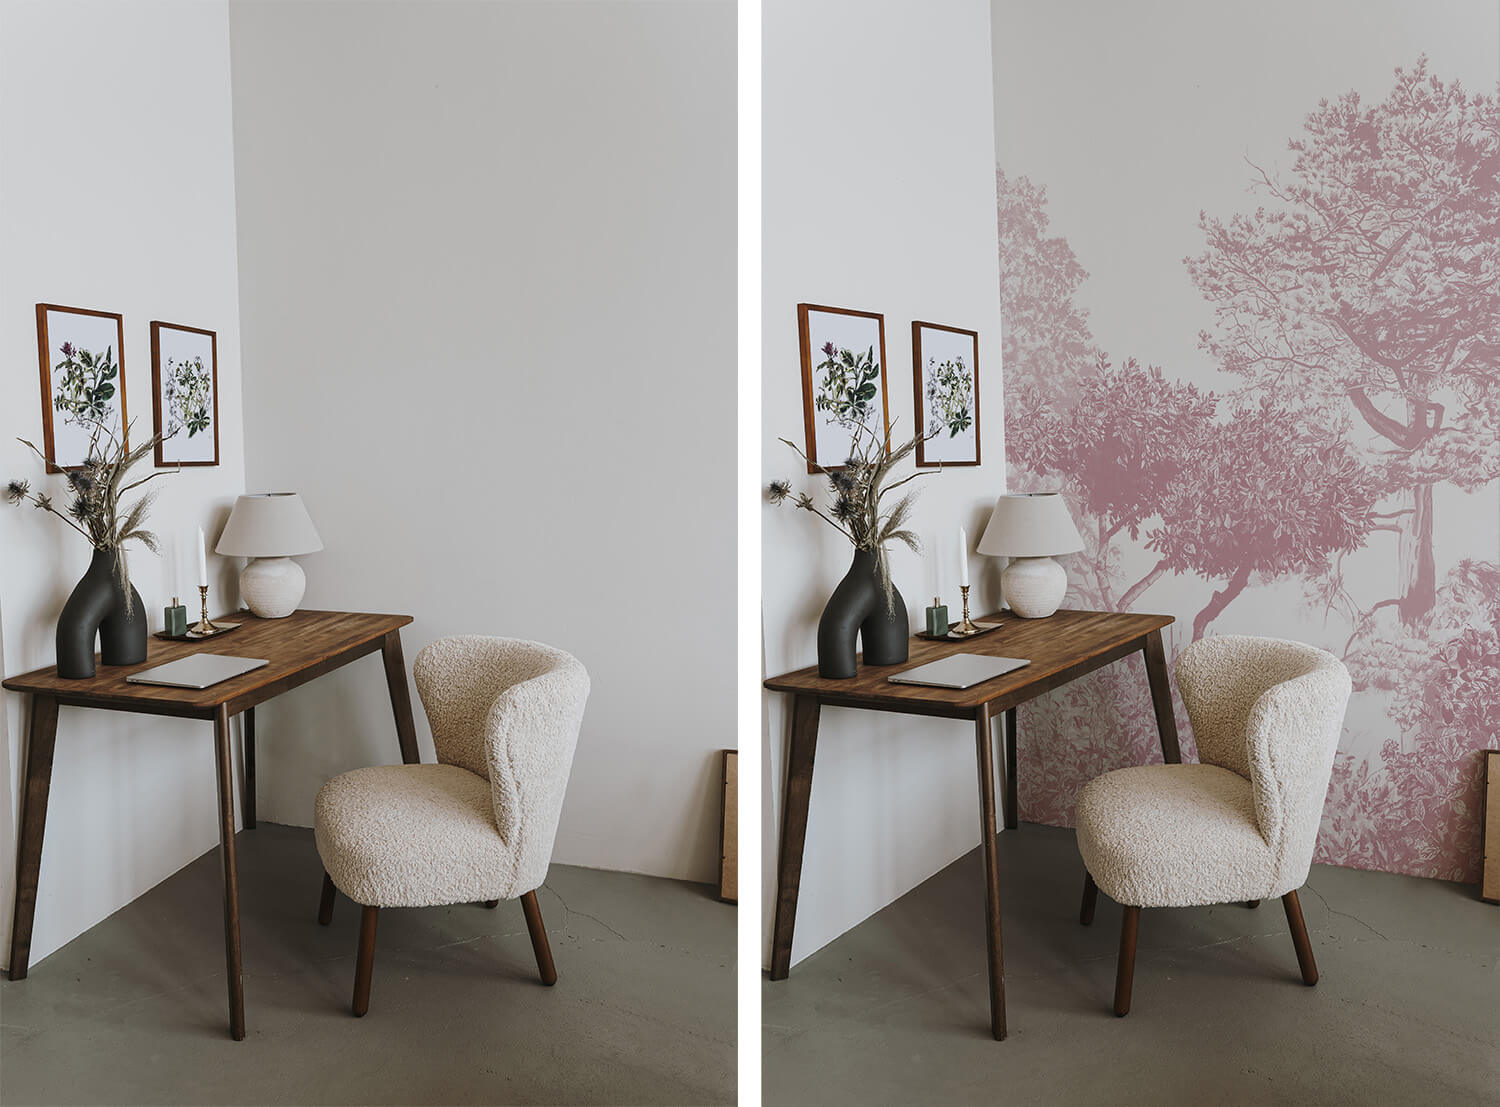 Before and after of trees mural wallpaper